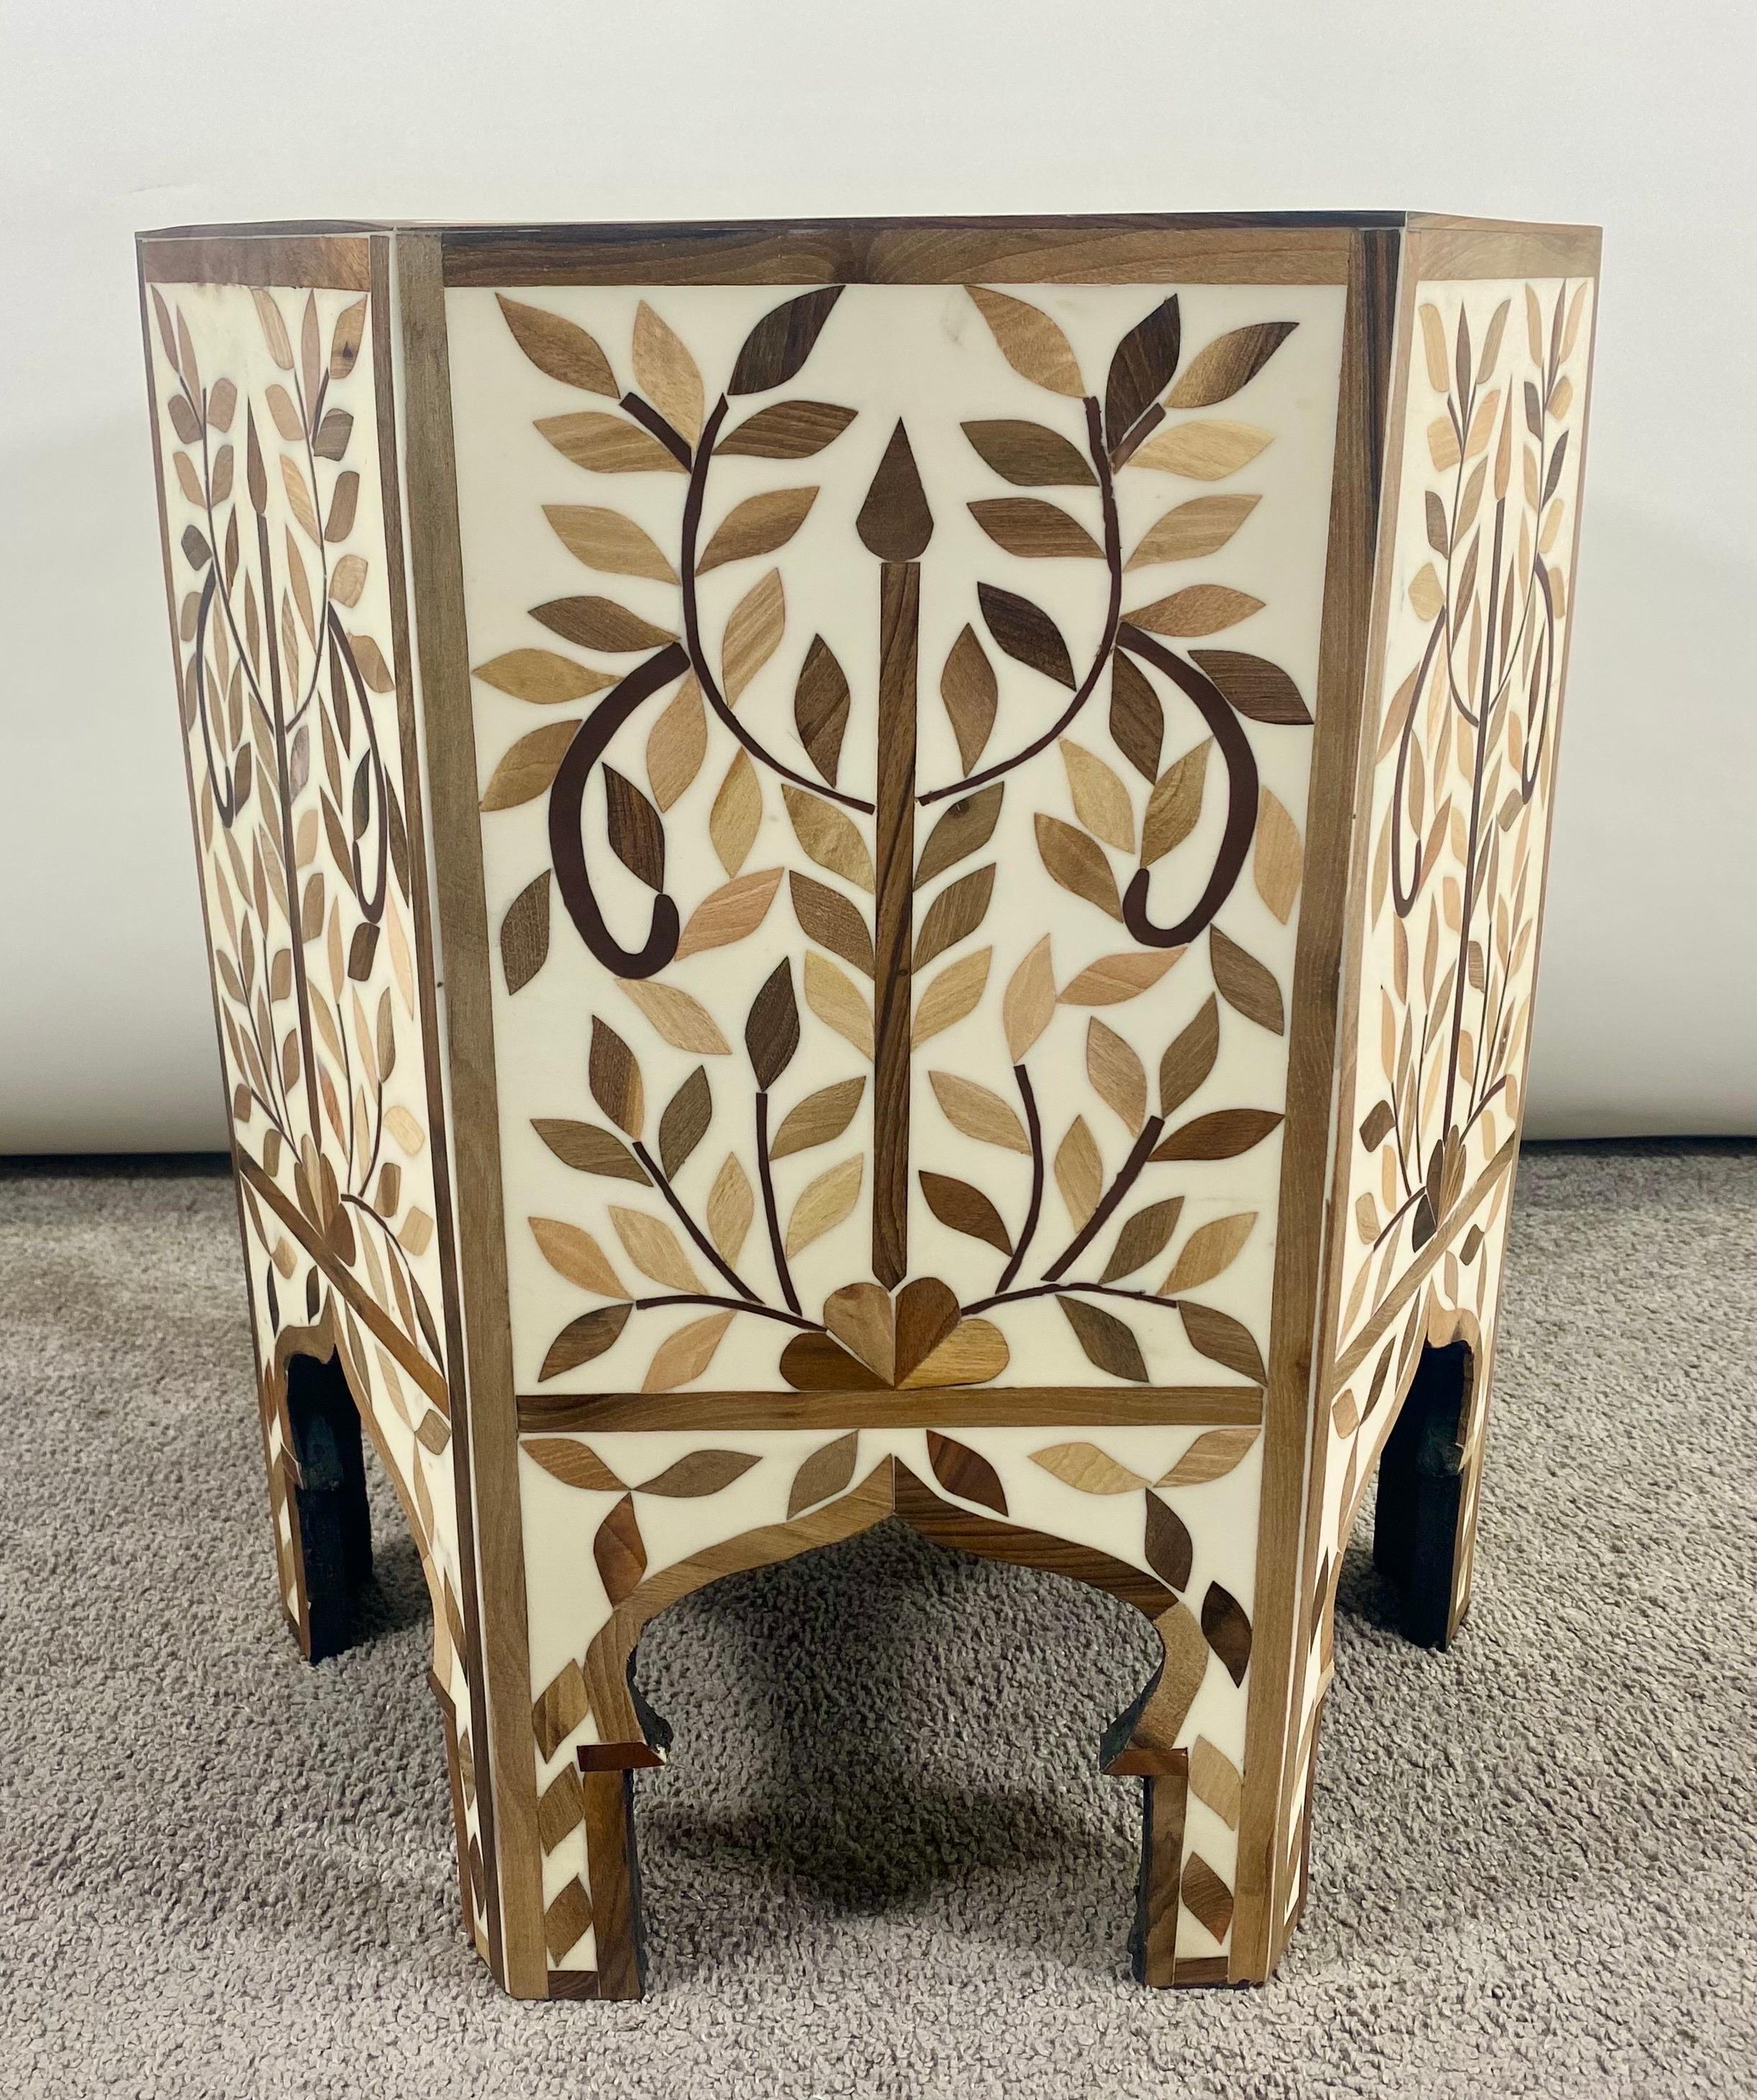 Moroccan Boho Chic Leaf Design Resin & Walnut Hexagonal Side or End Table, Pair For Sale 6